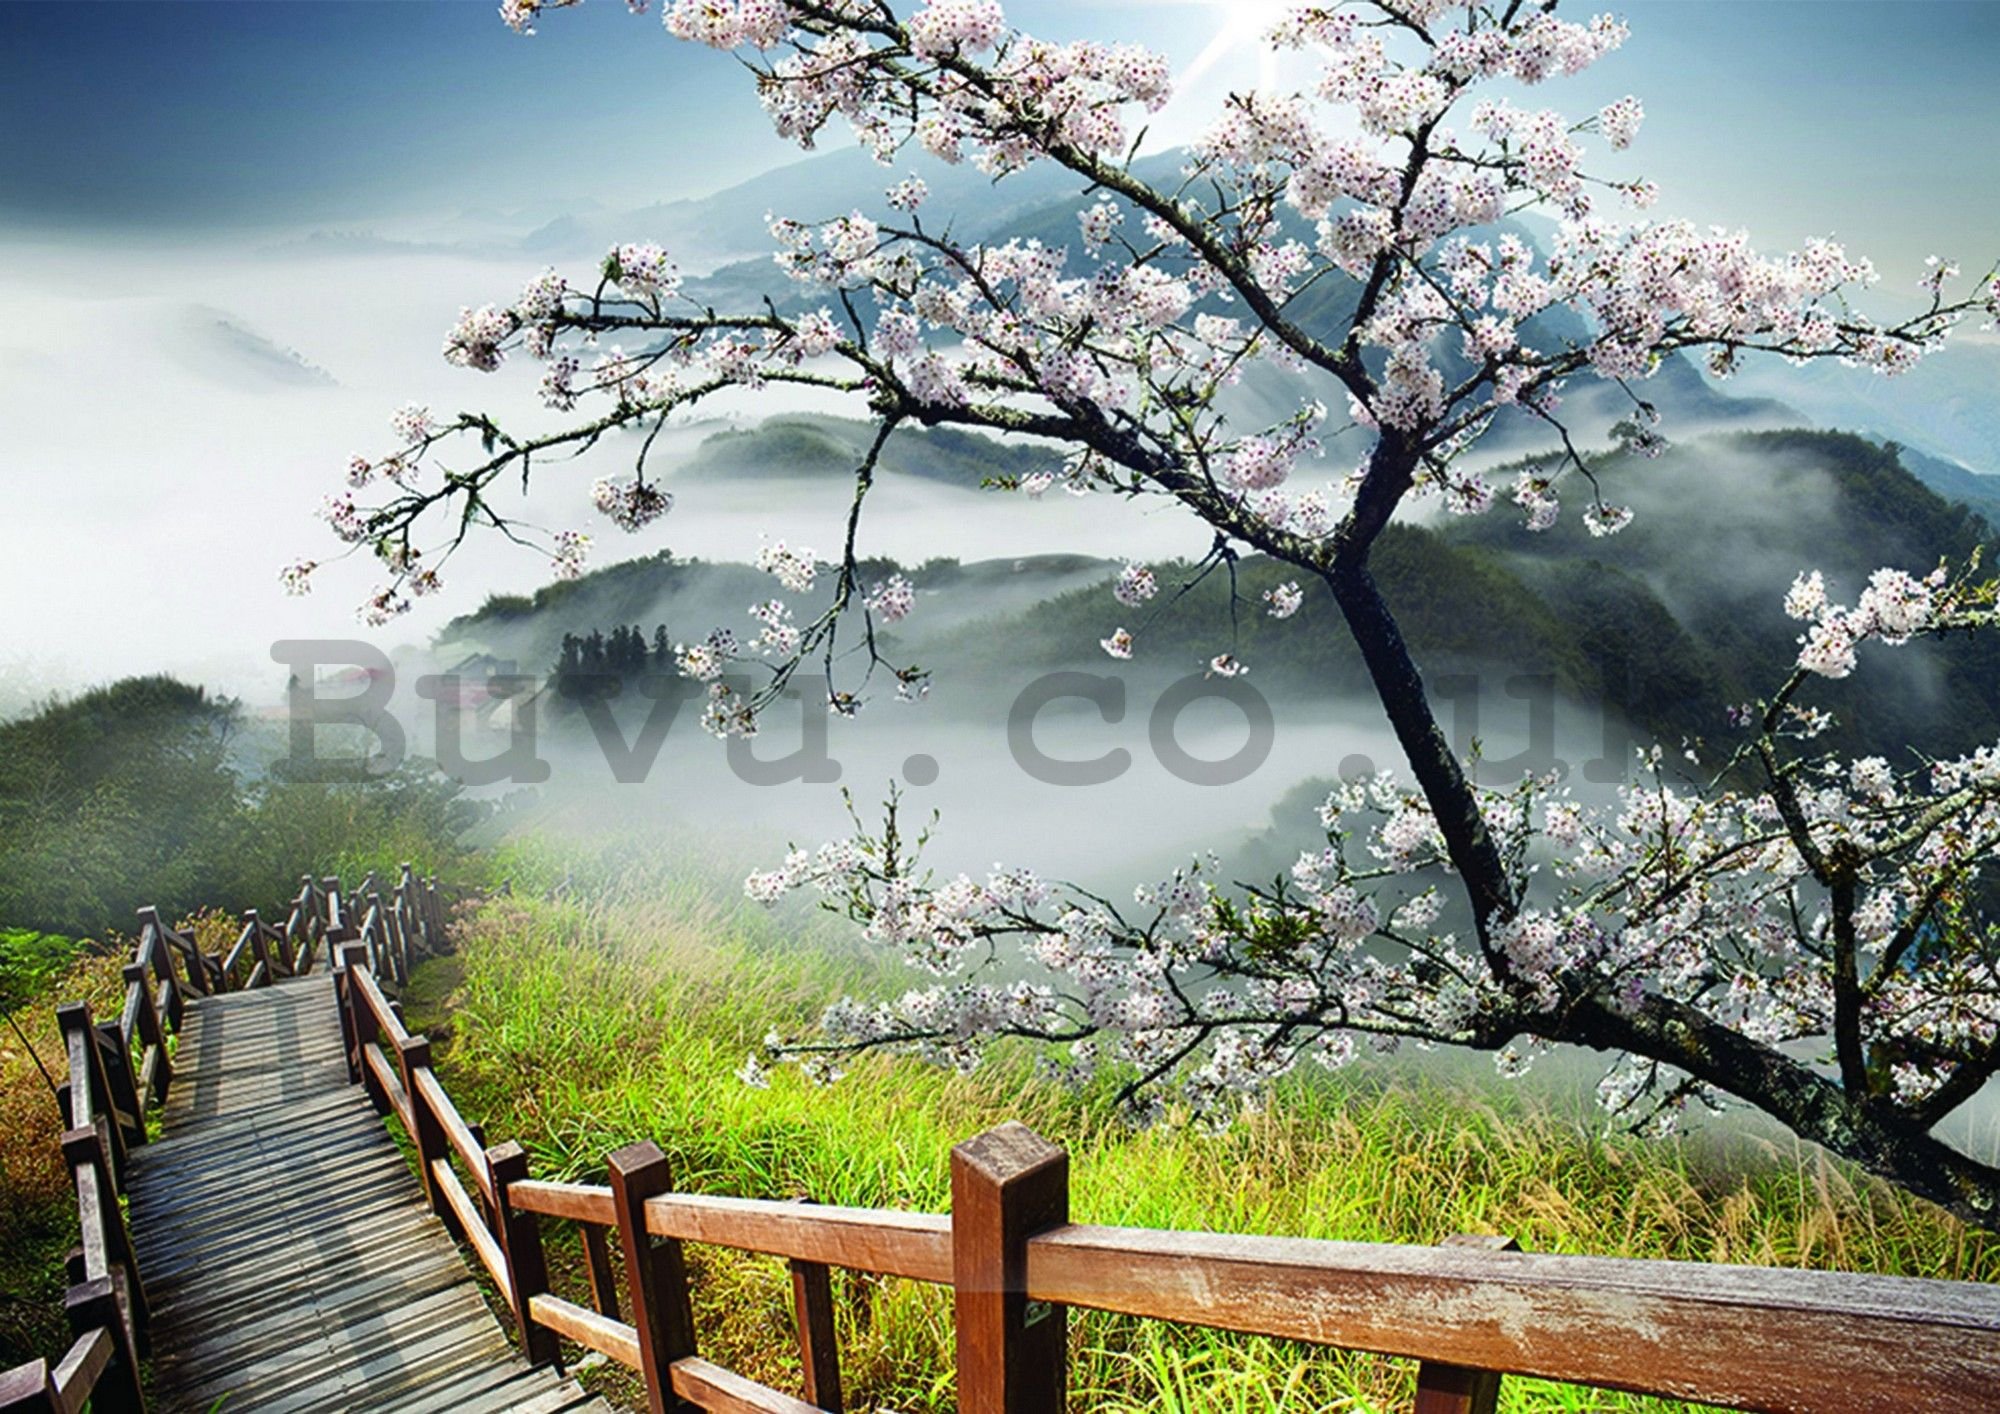 Wall mural: Cherry tree above the stairs - 254x368 cm